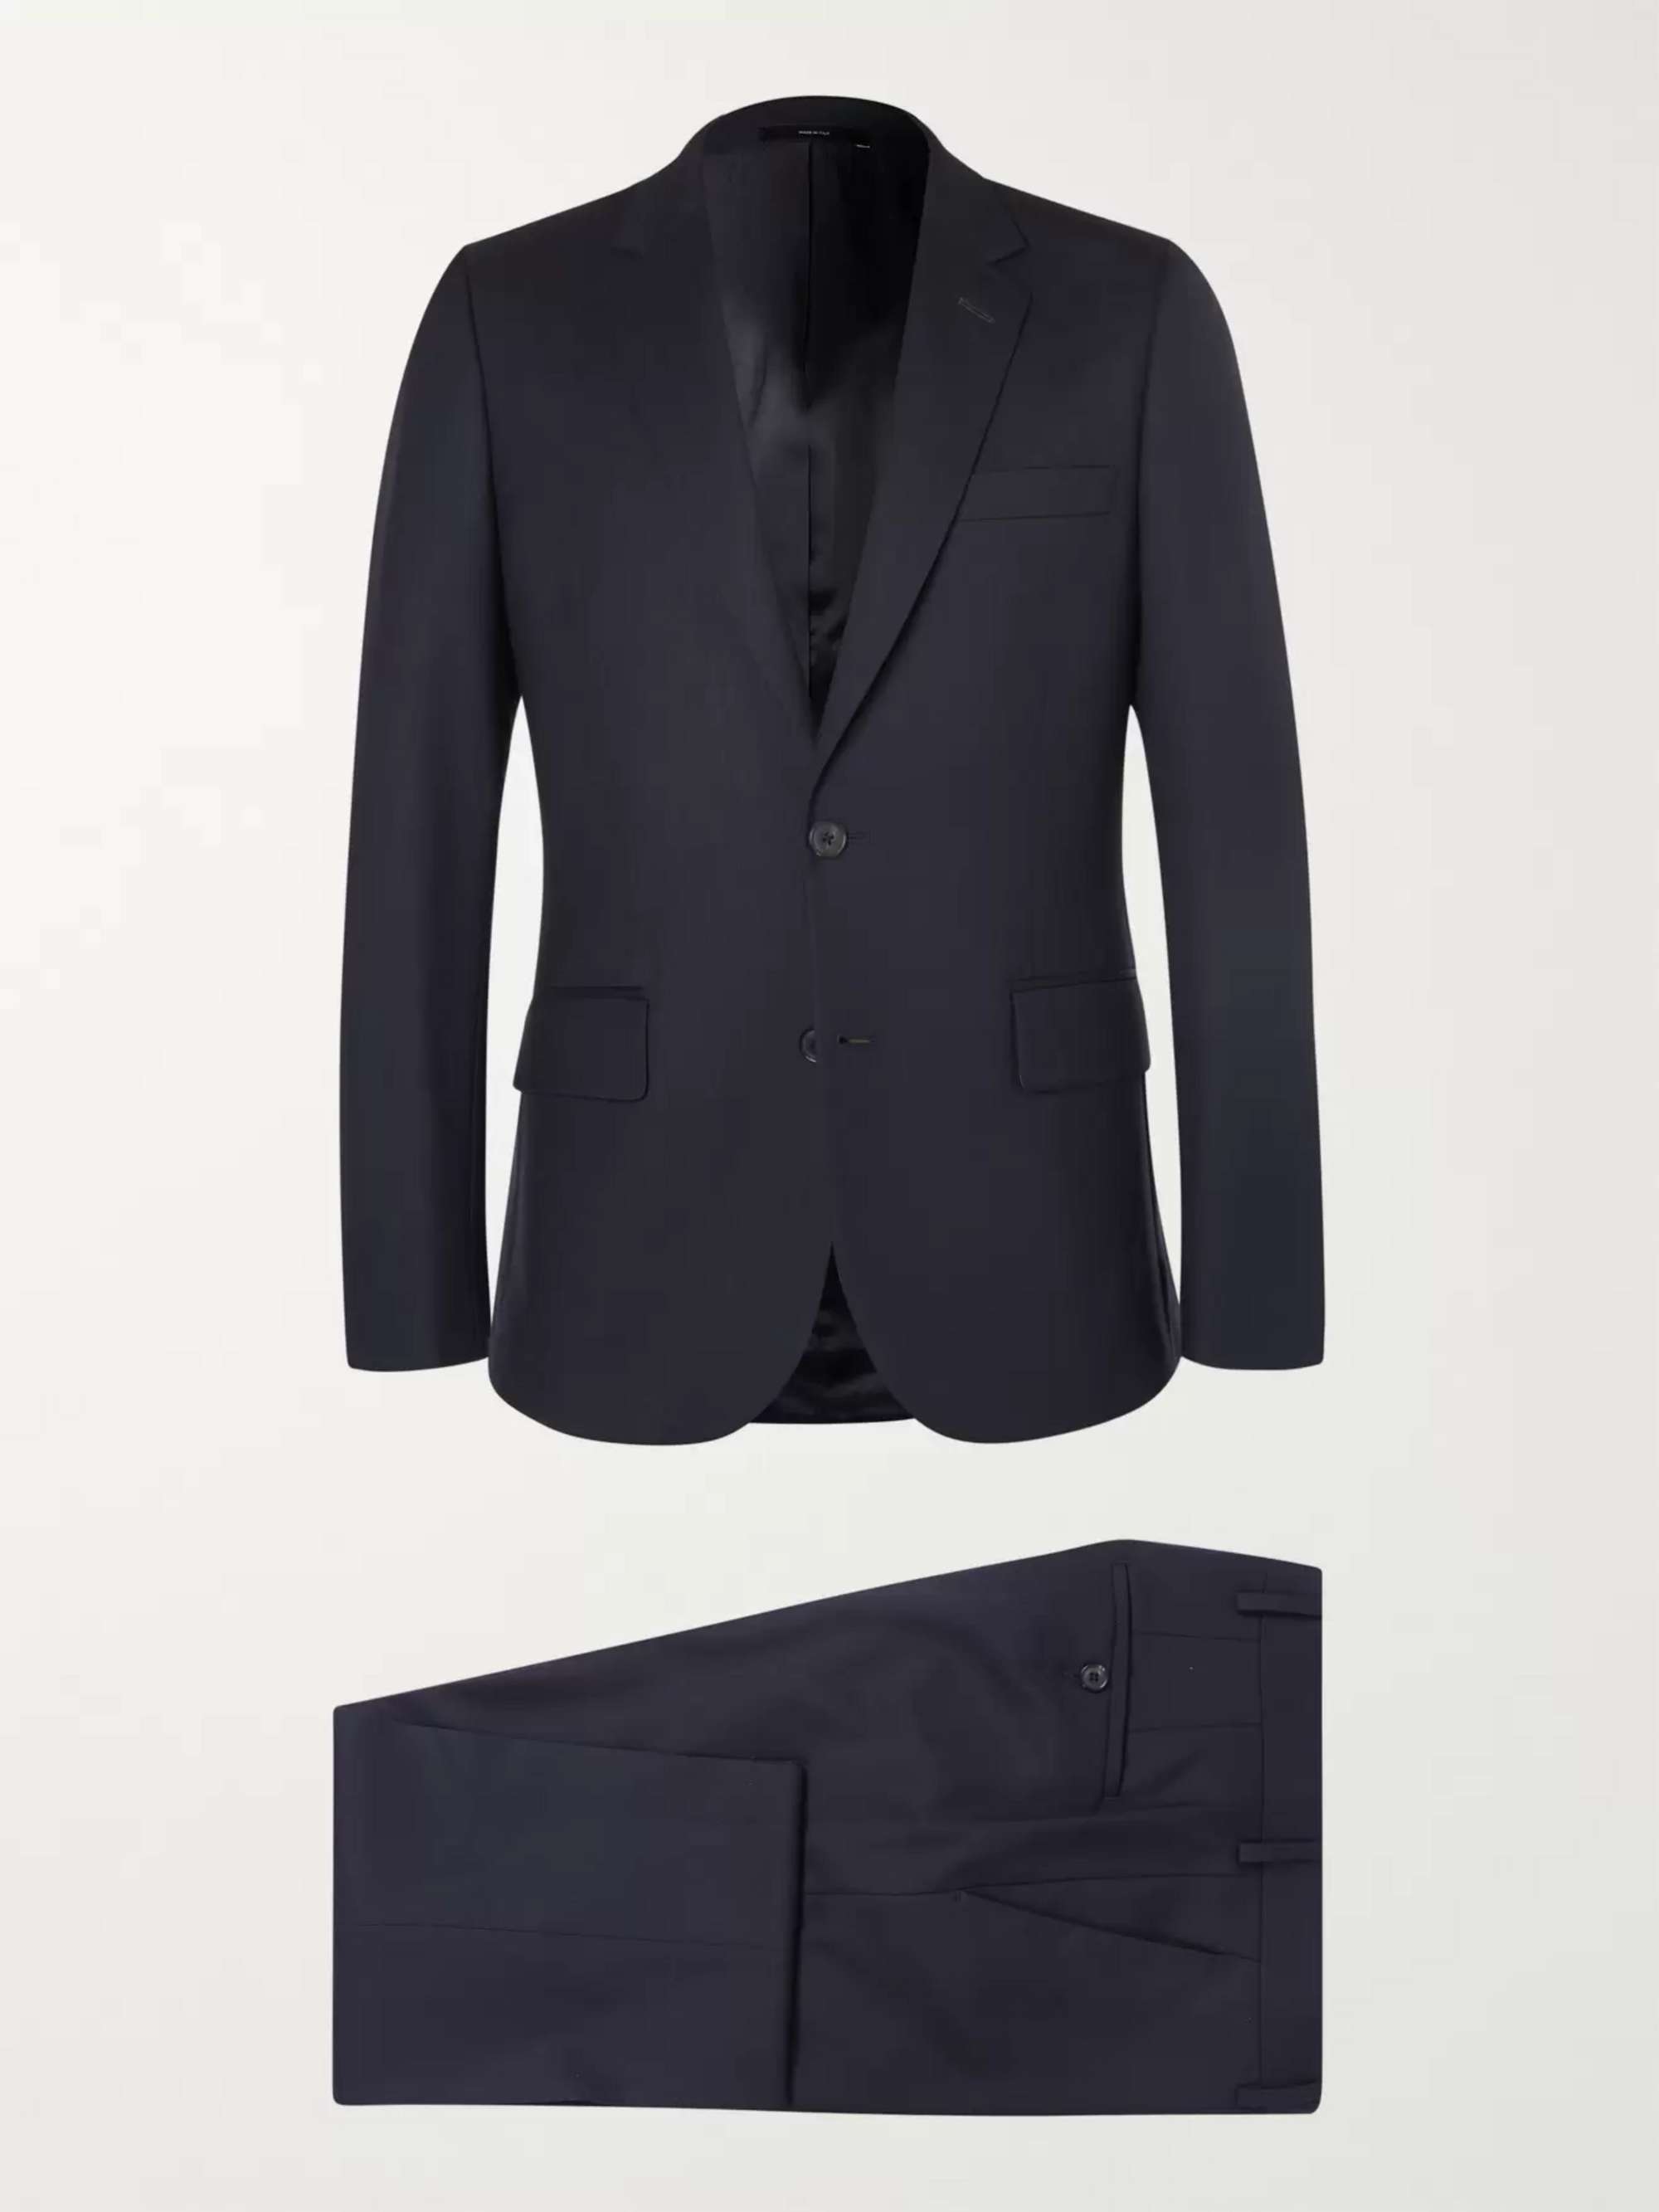 PAUL SMITH Navy A Suit To Travel In Soho Slim-Fit Wool Suit | MR PORTER